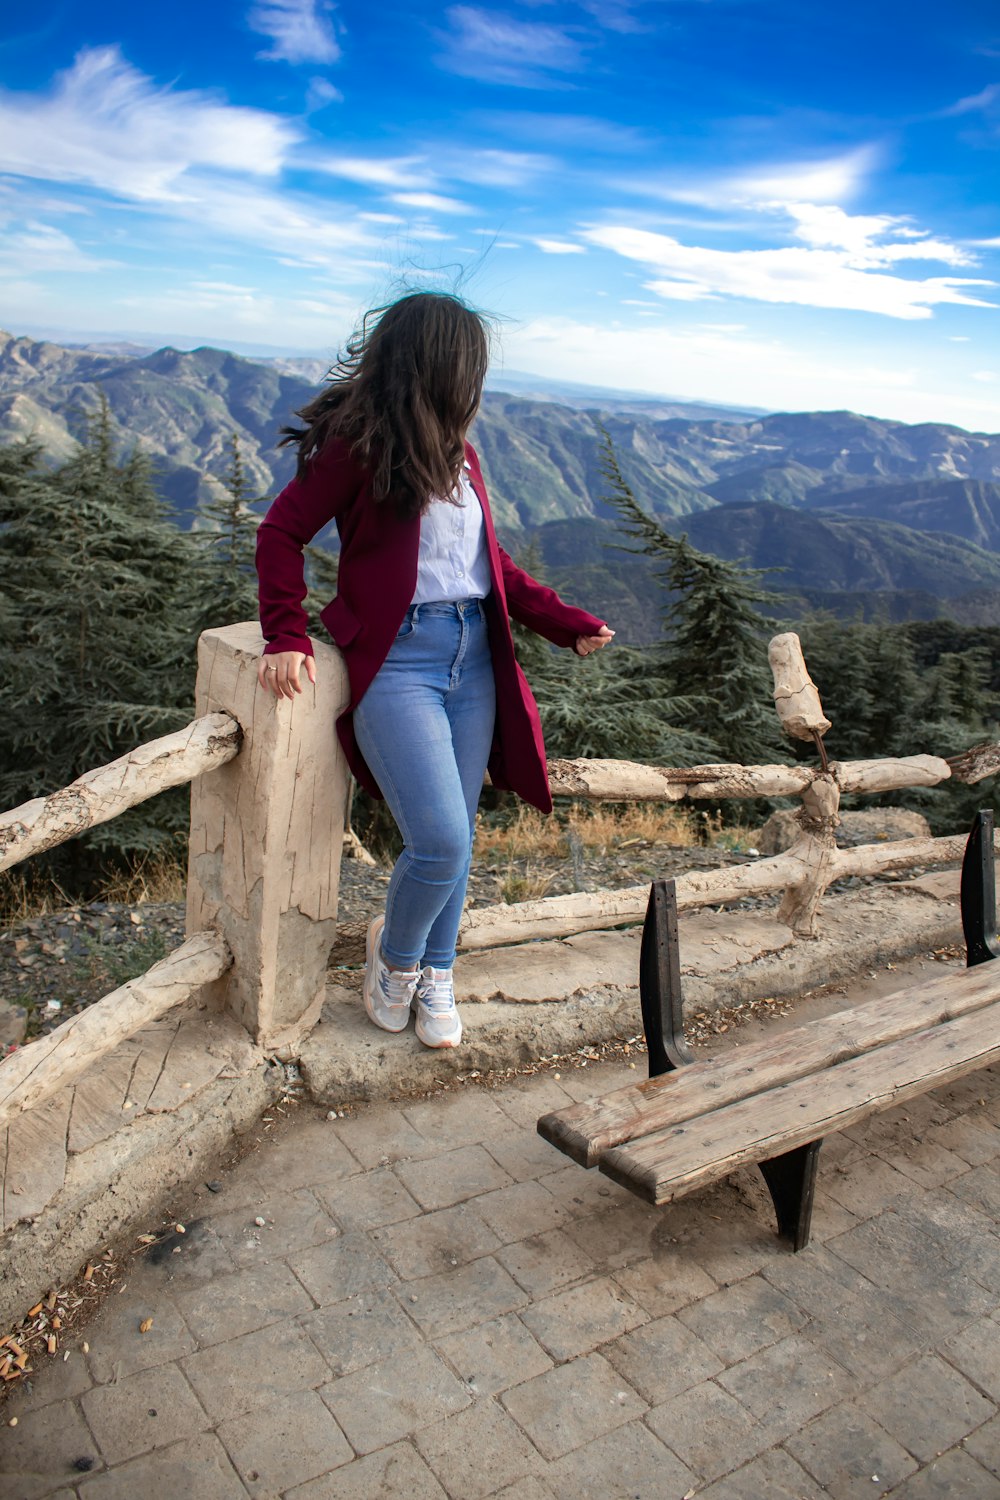 a woman leaning on a wooden bench with mountains in the background